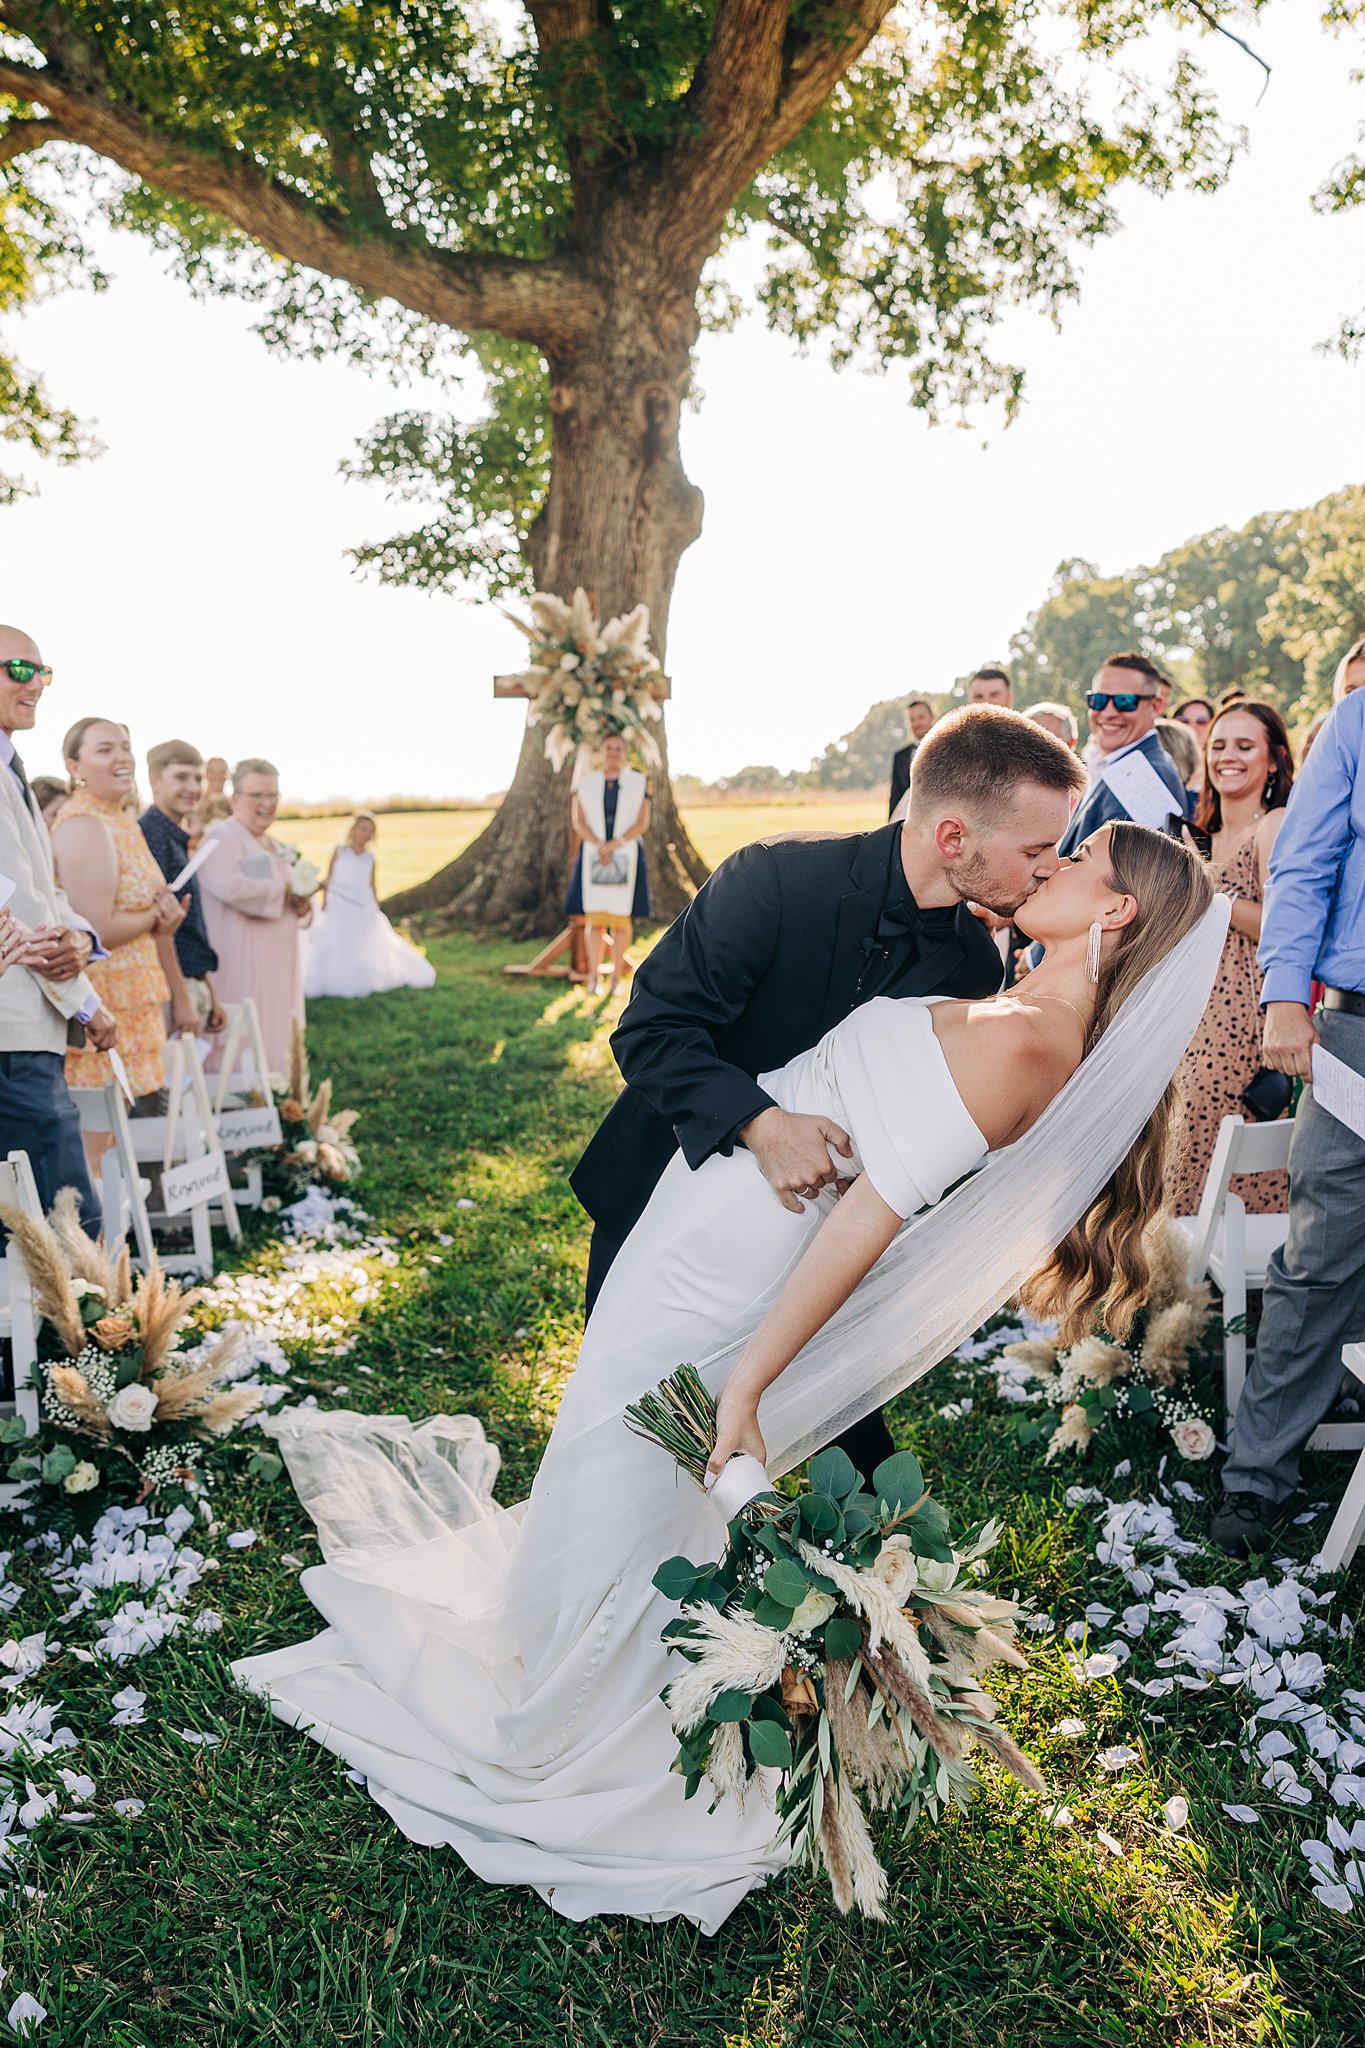 A groom dips his bride while exiting their Summerfield Farms wedding reception in the aisle with guests cheering them on